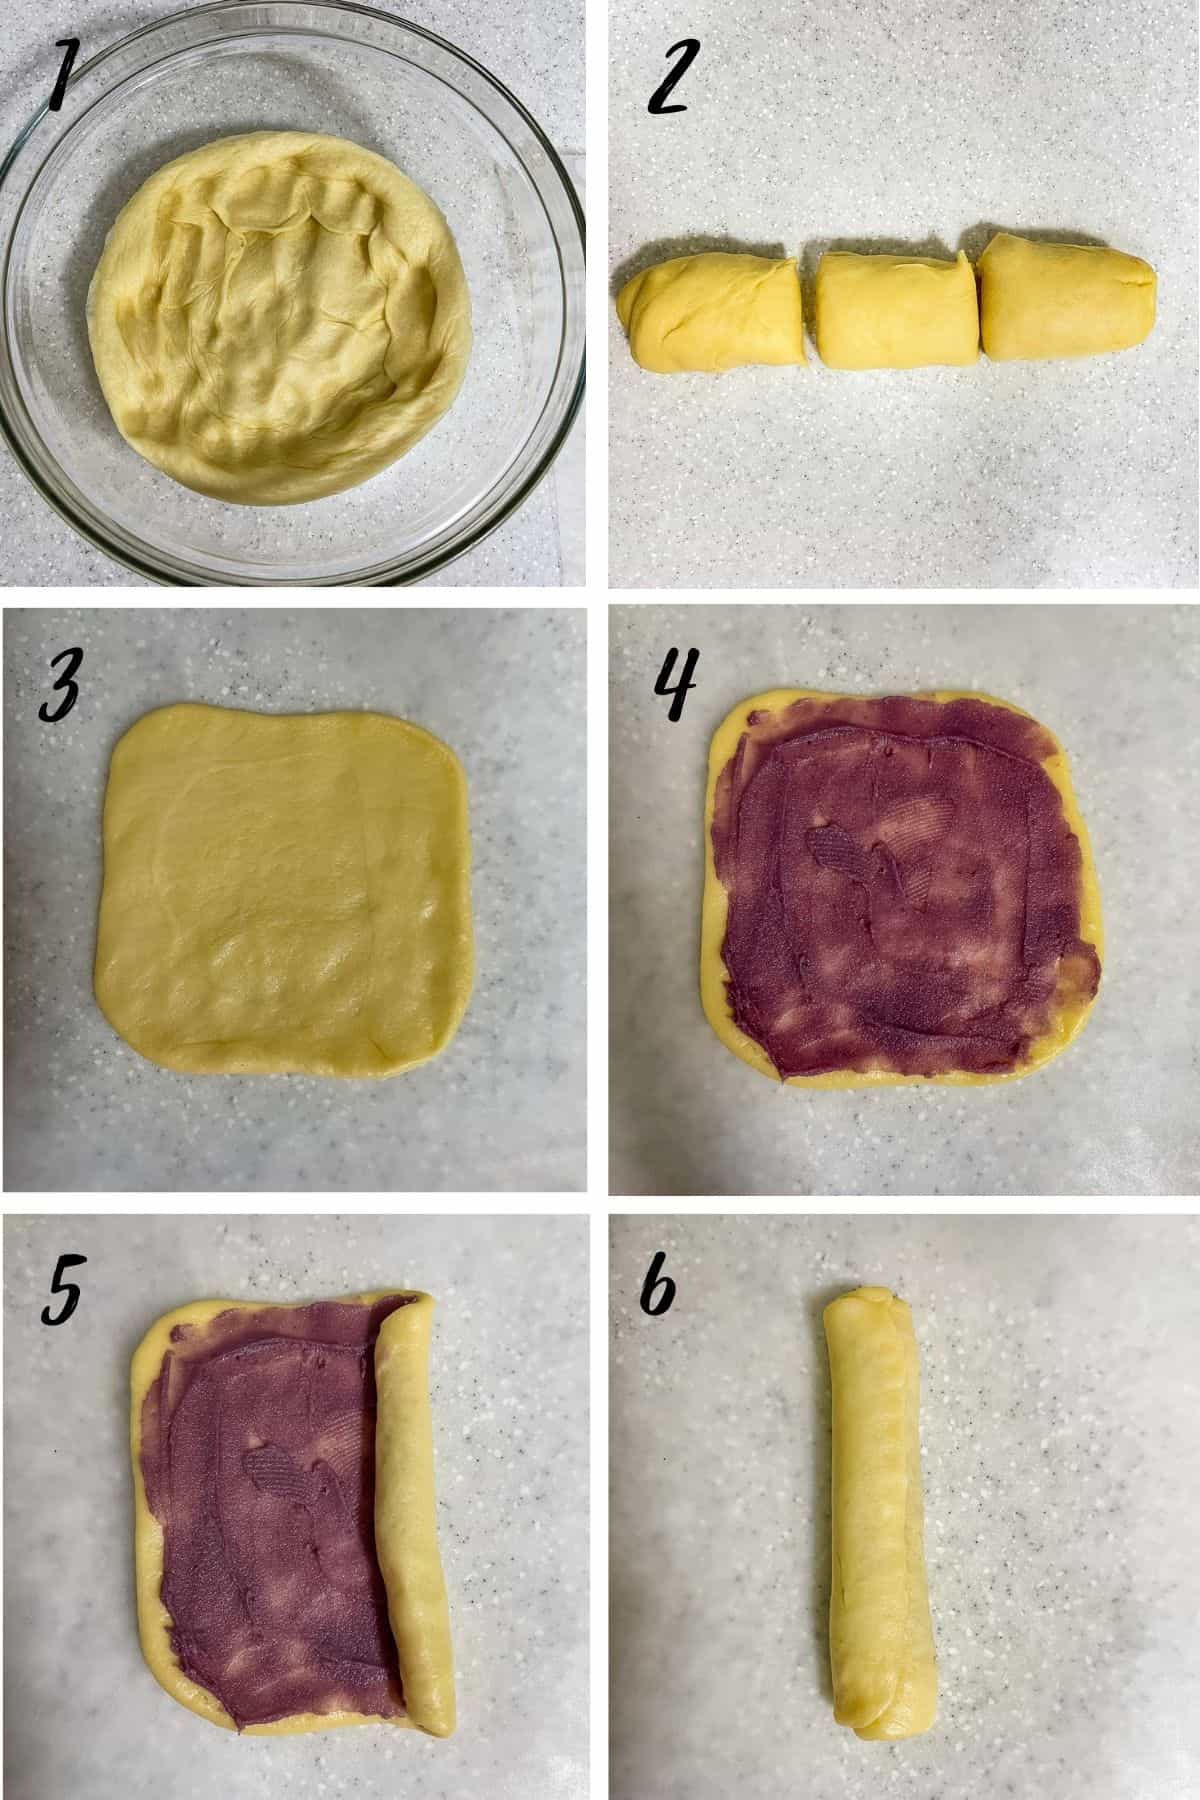 A poster of 6 images showing how to spread ube jam and roll the bread dough.